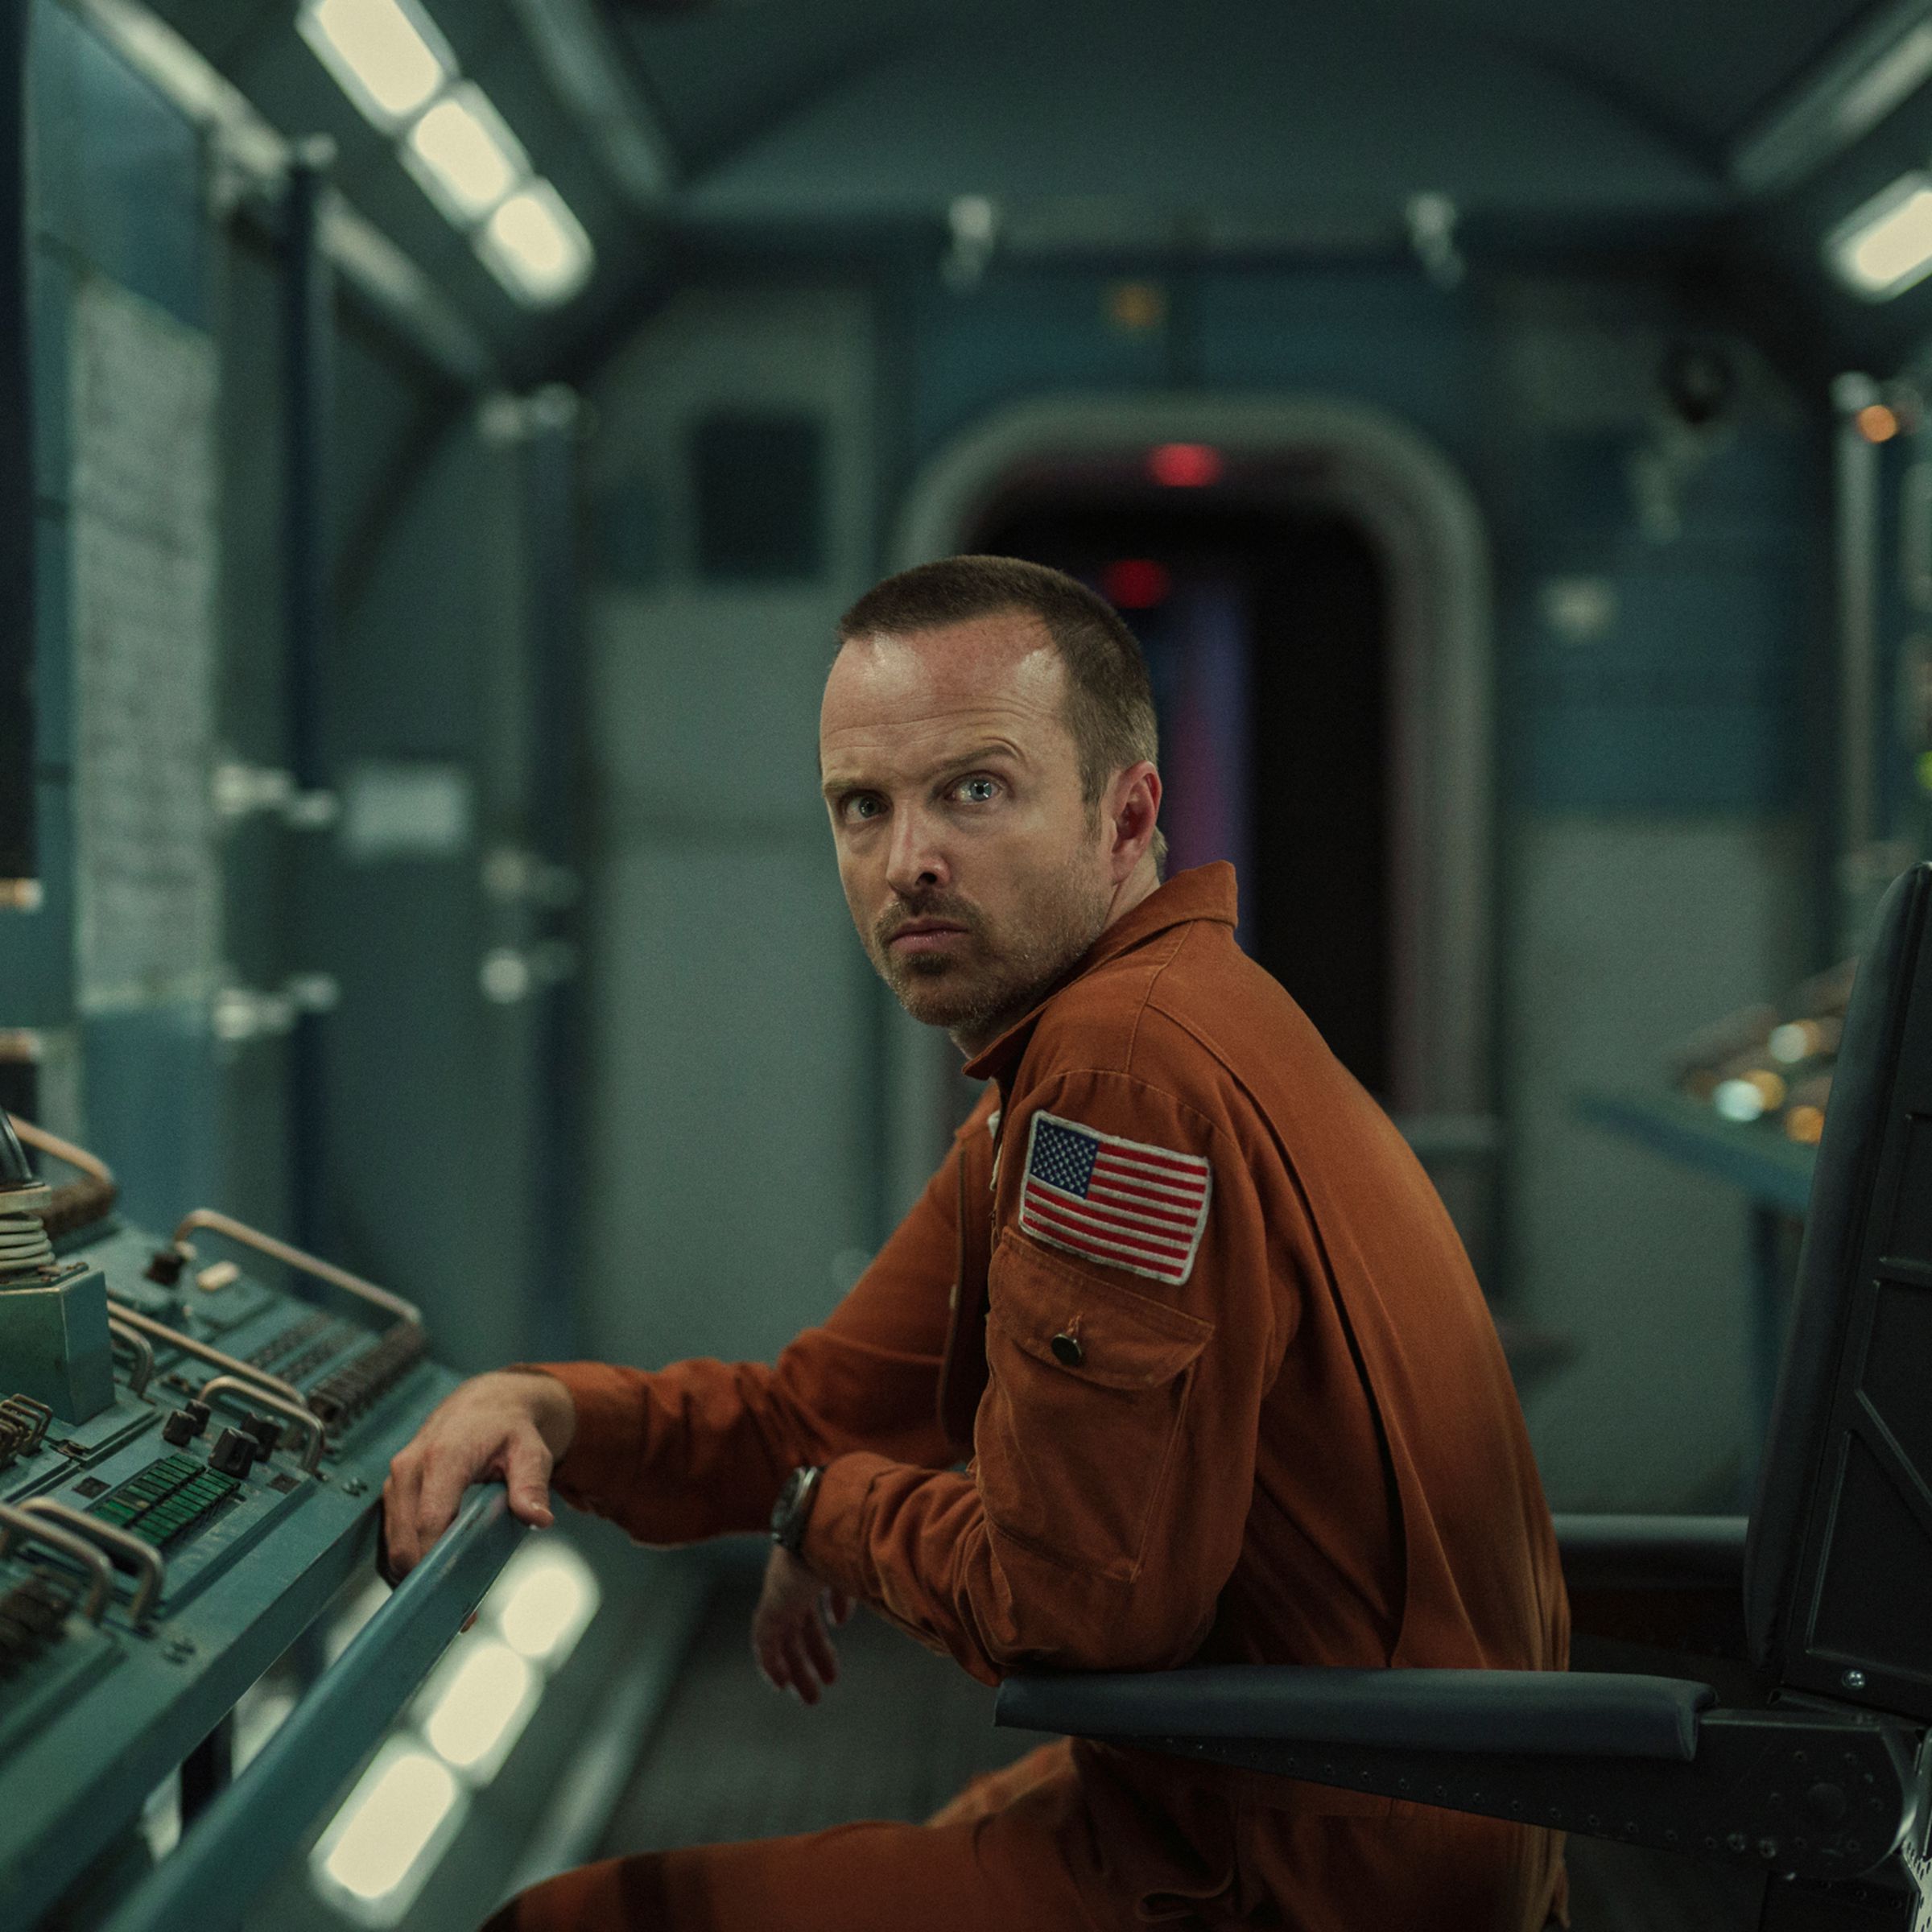 An image of actor Aaron Paul at a board of 1960s spaceship controls.